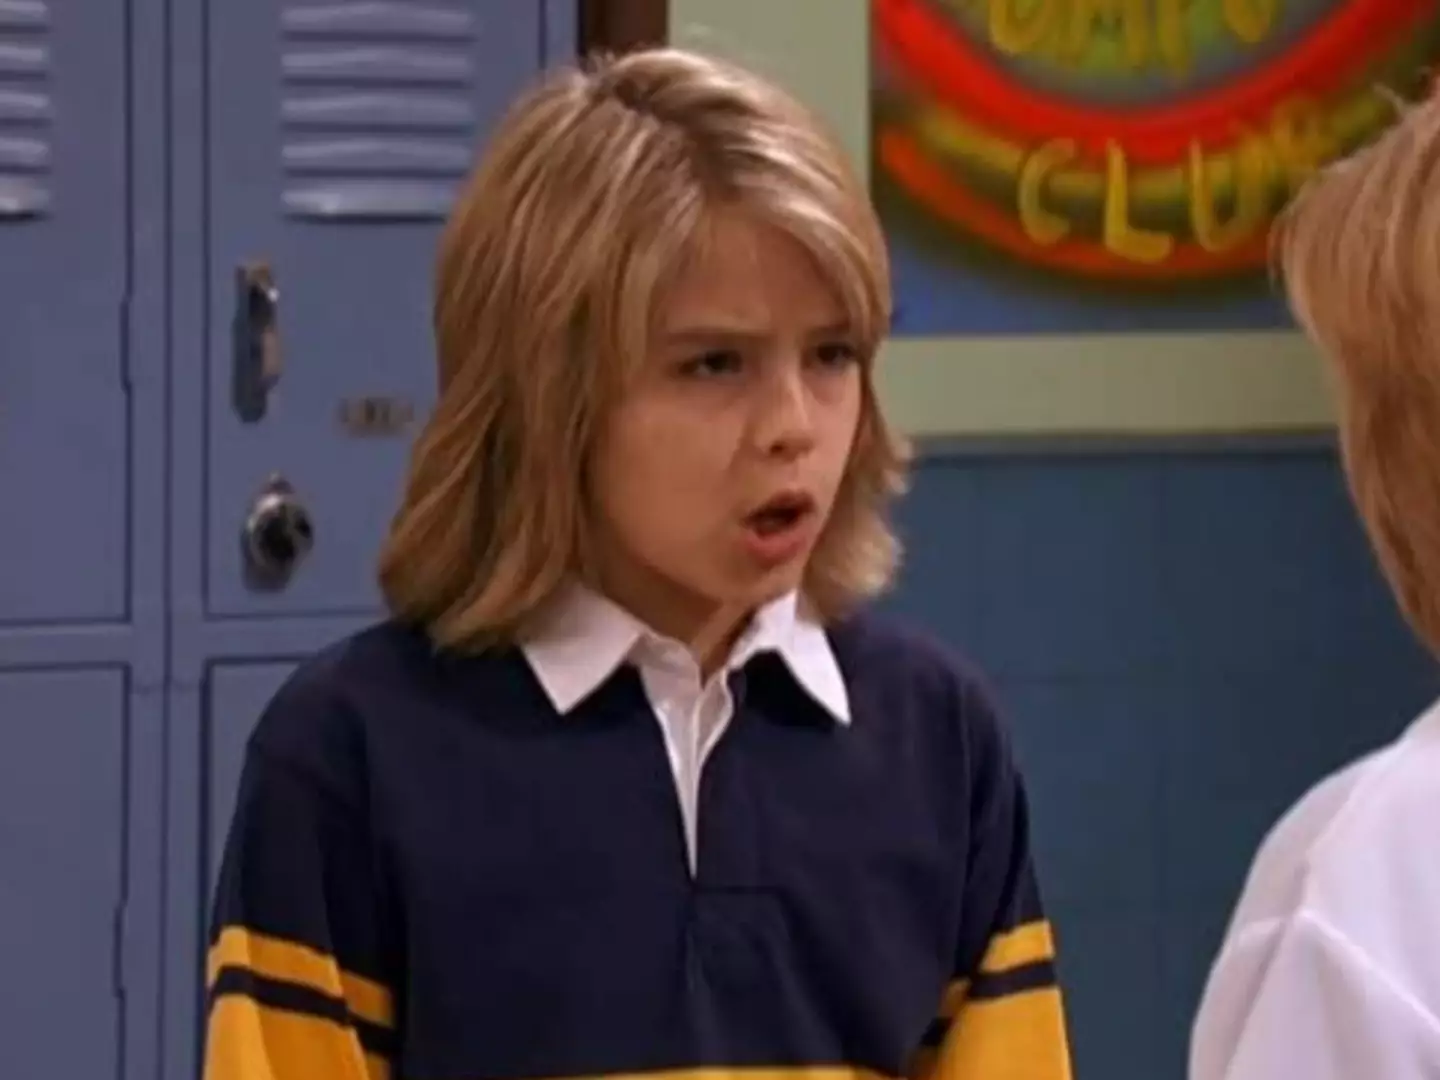 Sprouse says he was a 'f***ing a**hole'.